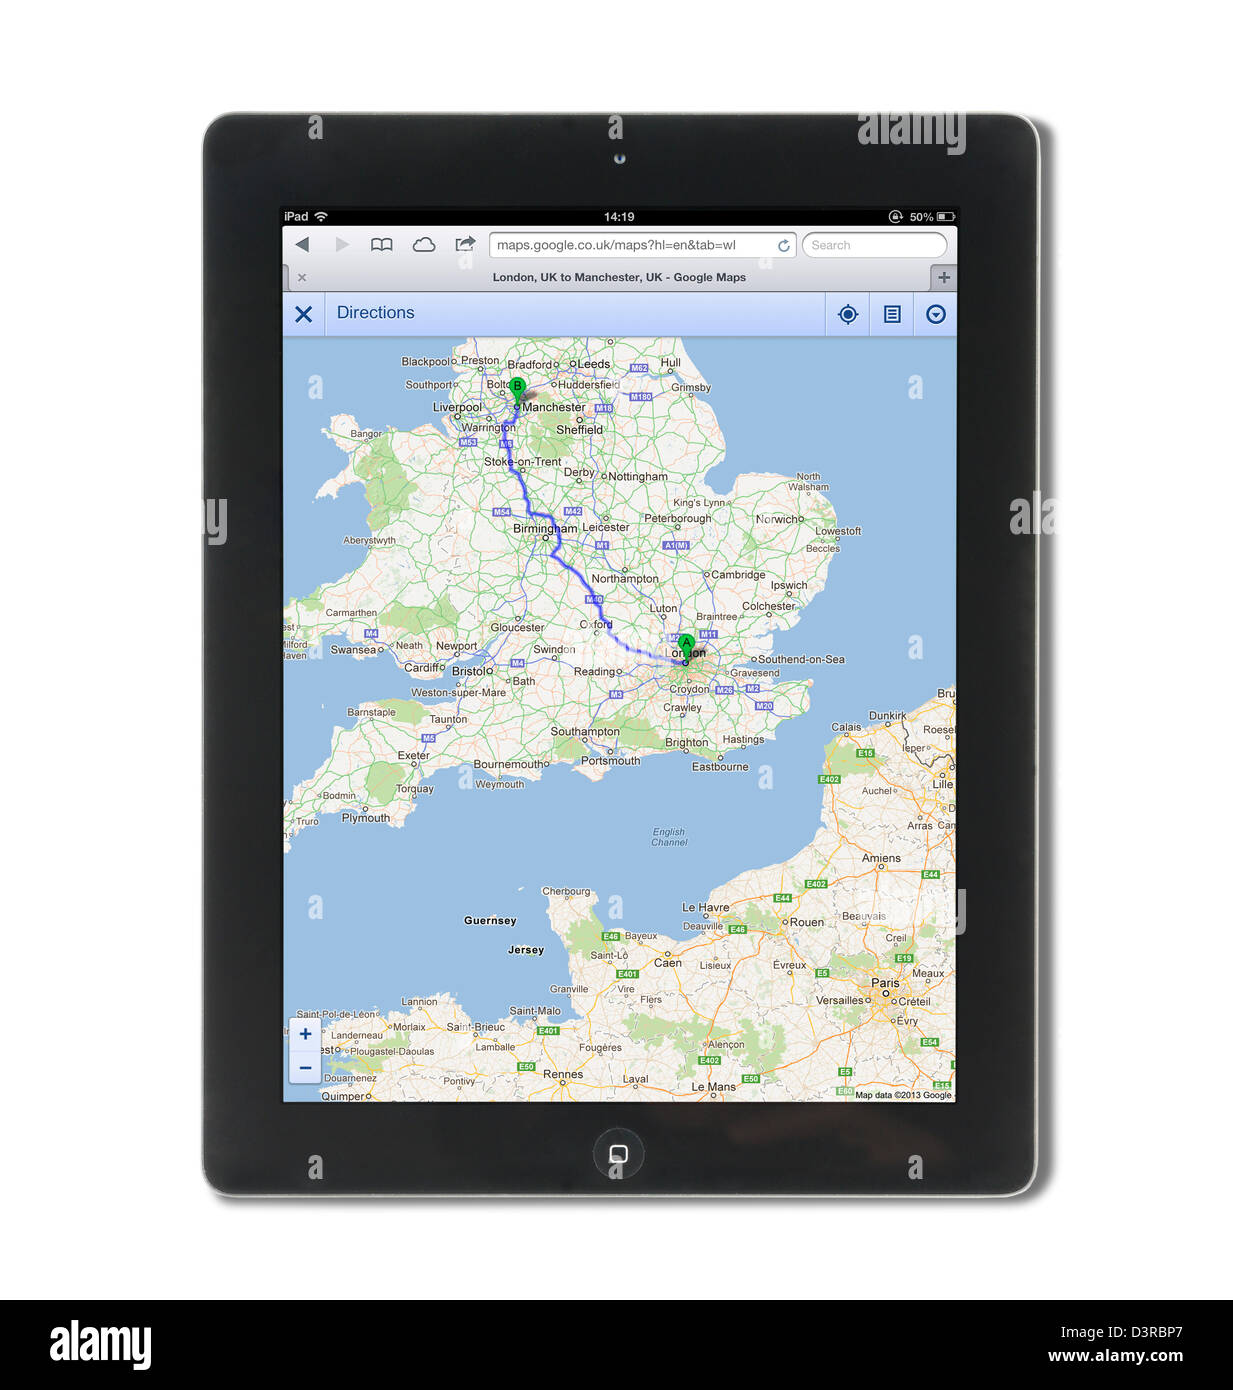 Planning a route from London to Manchester using Maps on Google.co.uk, viewed on a 4th generation iPad Stock Photo